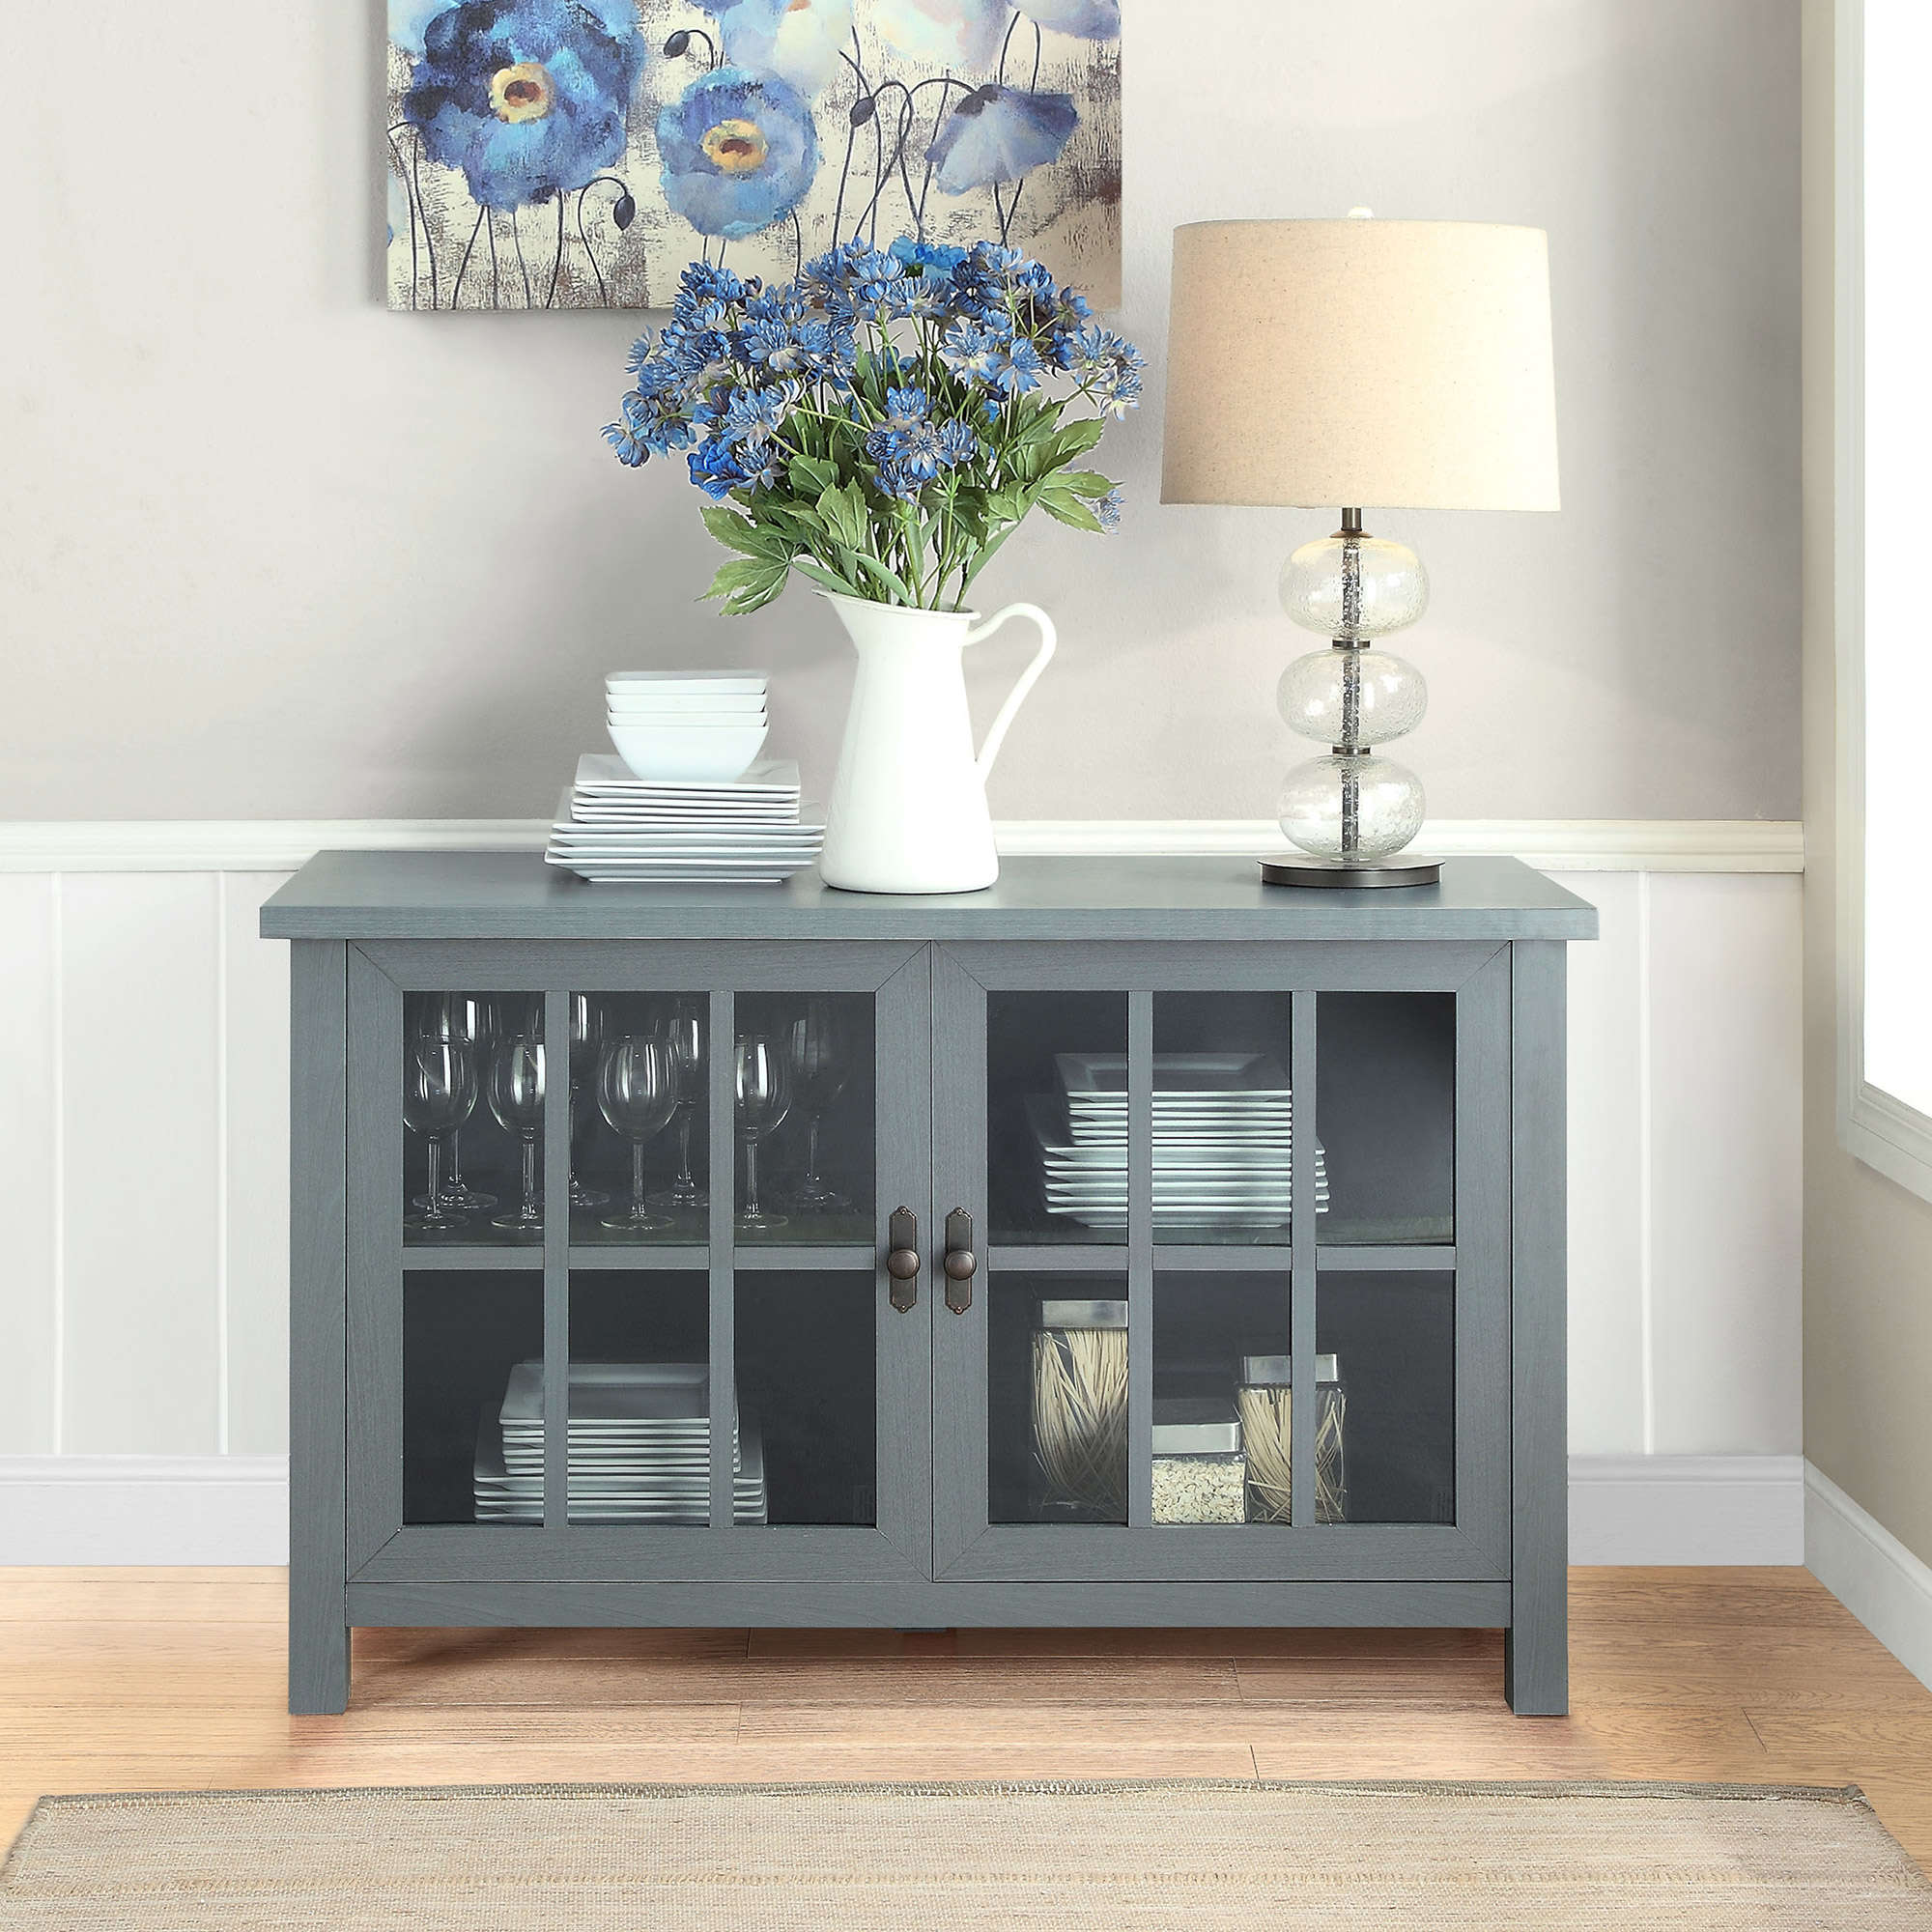 Better Homes & Gardens Oxford Square TV Stand for TVs up to 55", Antique Blue - image 5 of 7